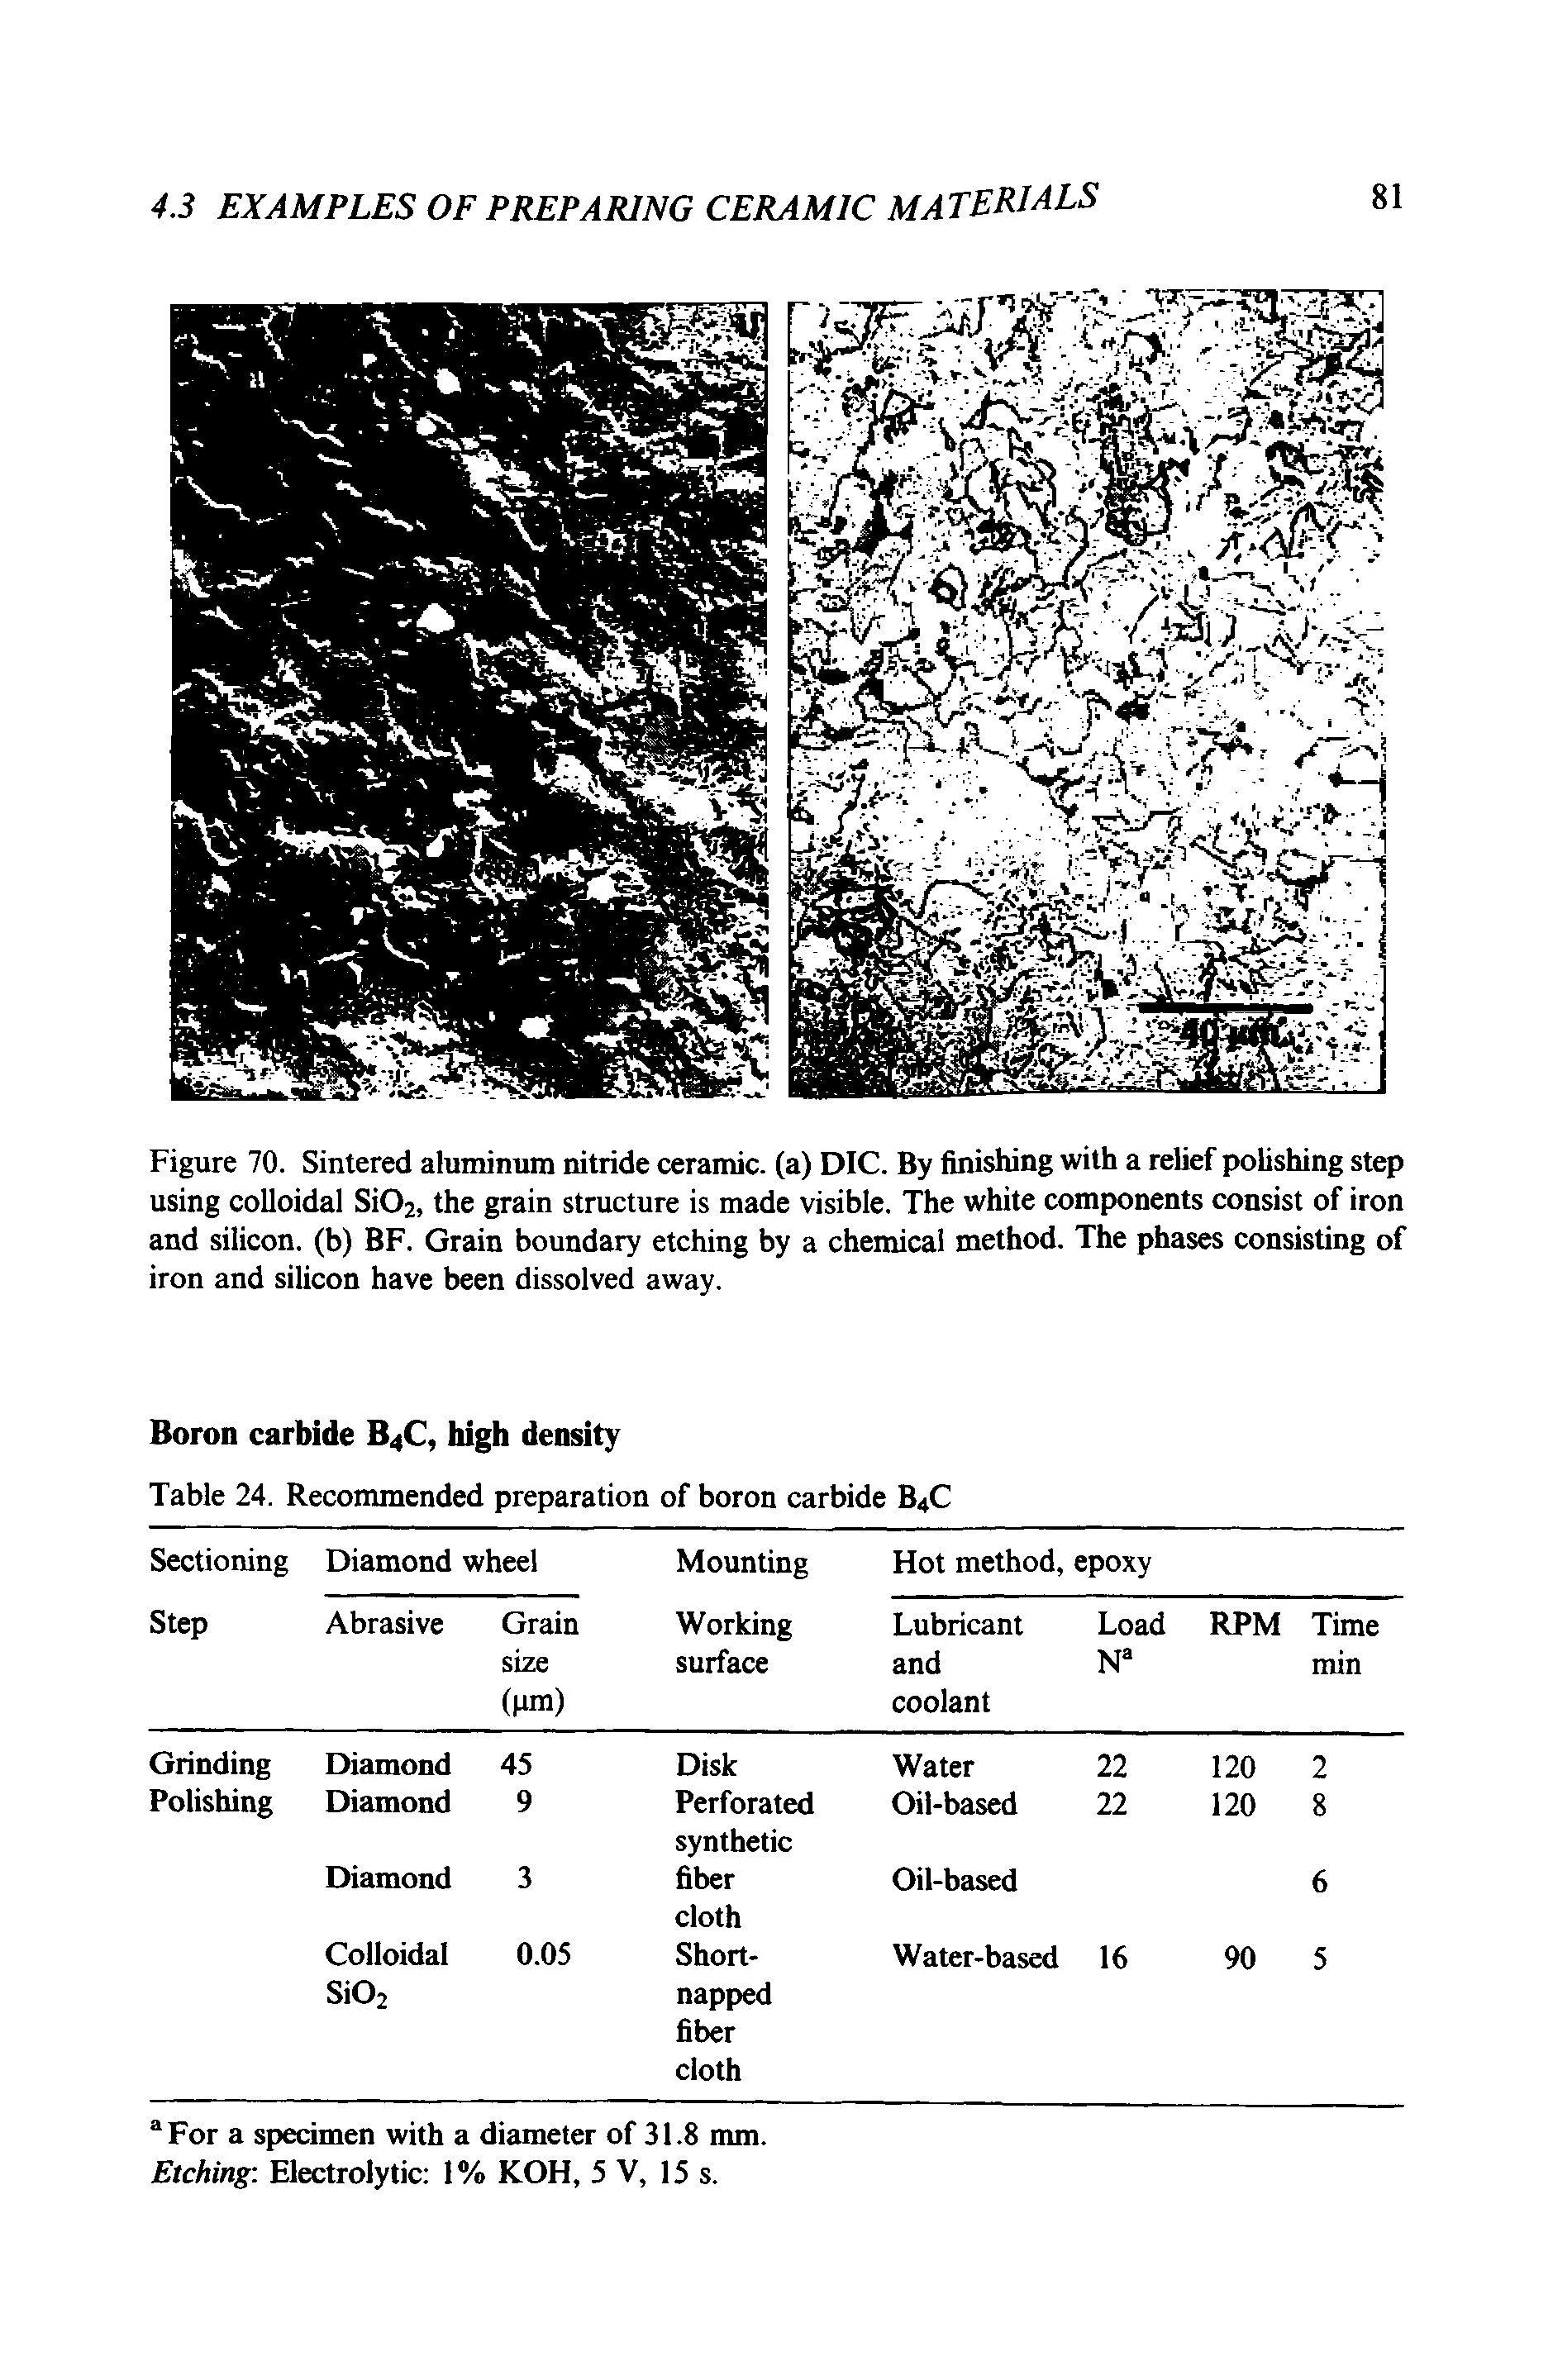 Figure 70. Sintered aluminum nitride ceramic, (a) DIC. By finishing with a relief pohshing step using colloidal SiOj, the grain structure is made visible. The white components consist of iron and silicon, (b) BF. Grain boundary etching by a chemical method. The phases consisting of iron and silicon have been dissolved away.